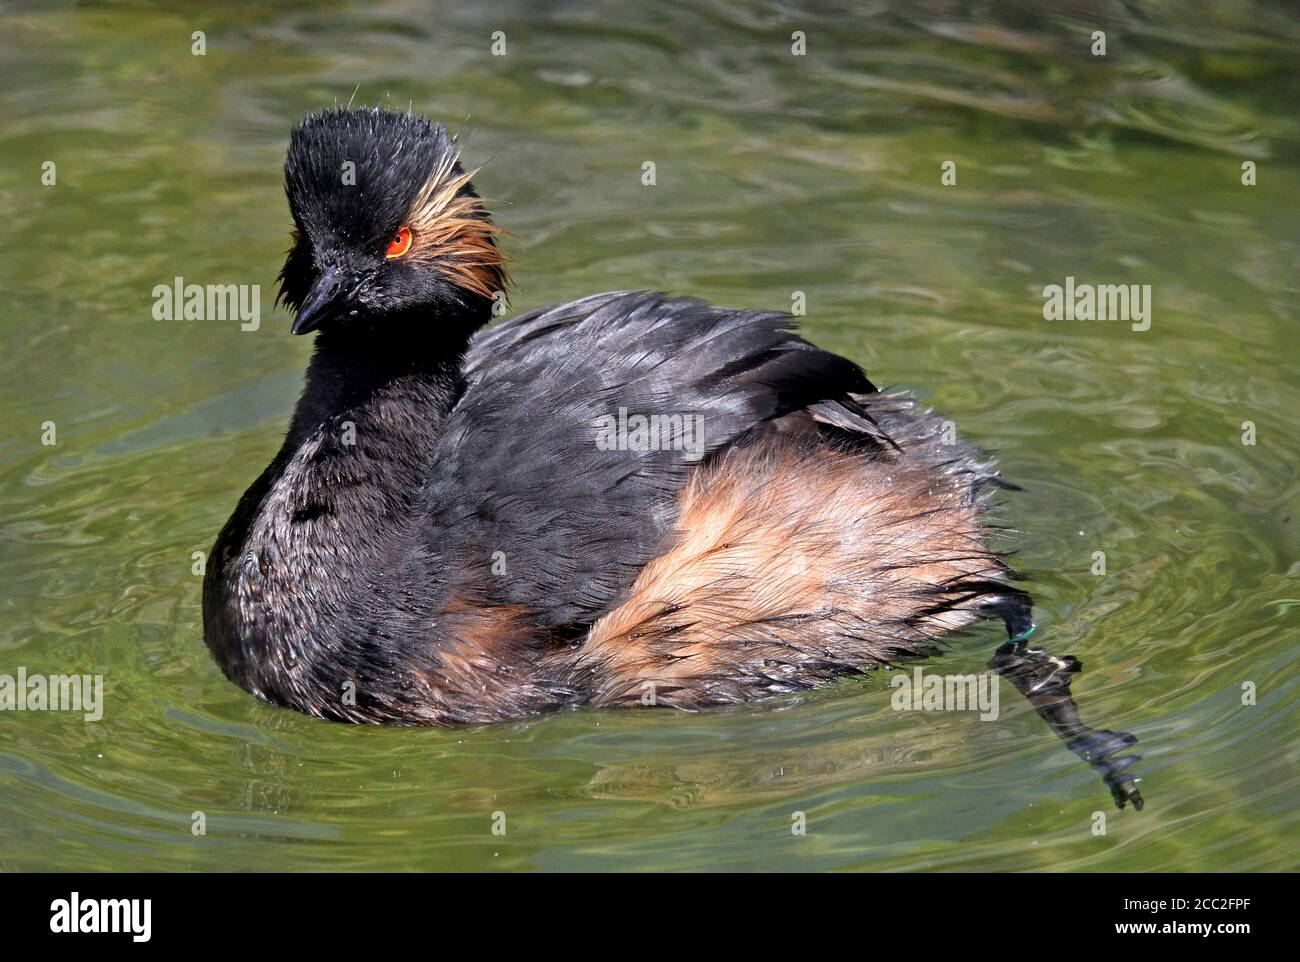 A Black-necked Grebe (Podiceps nigricollis) swimming on a small lake in Southern England Stock Photo